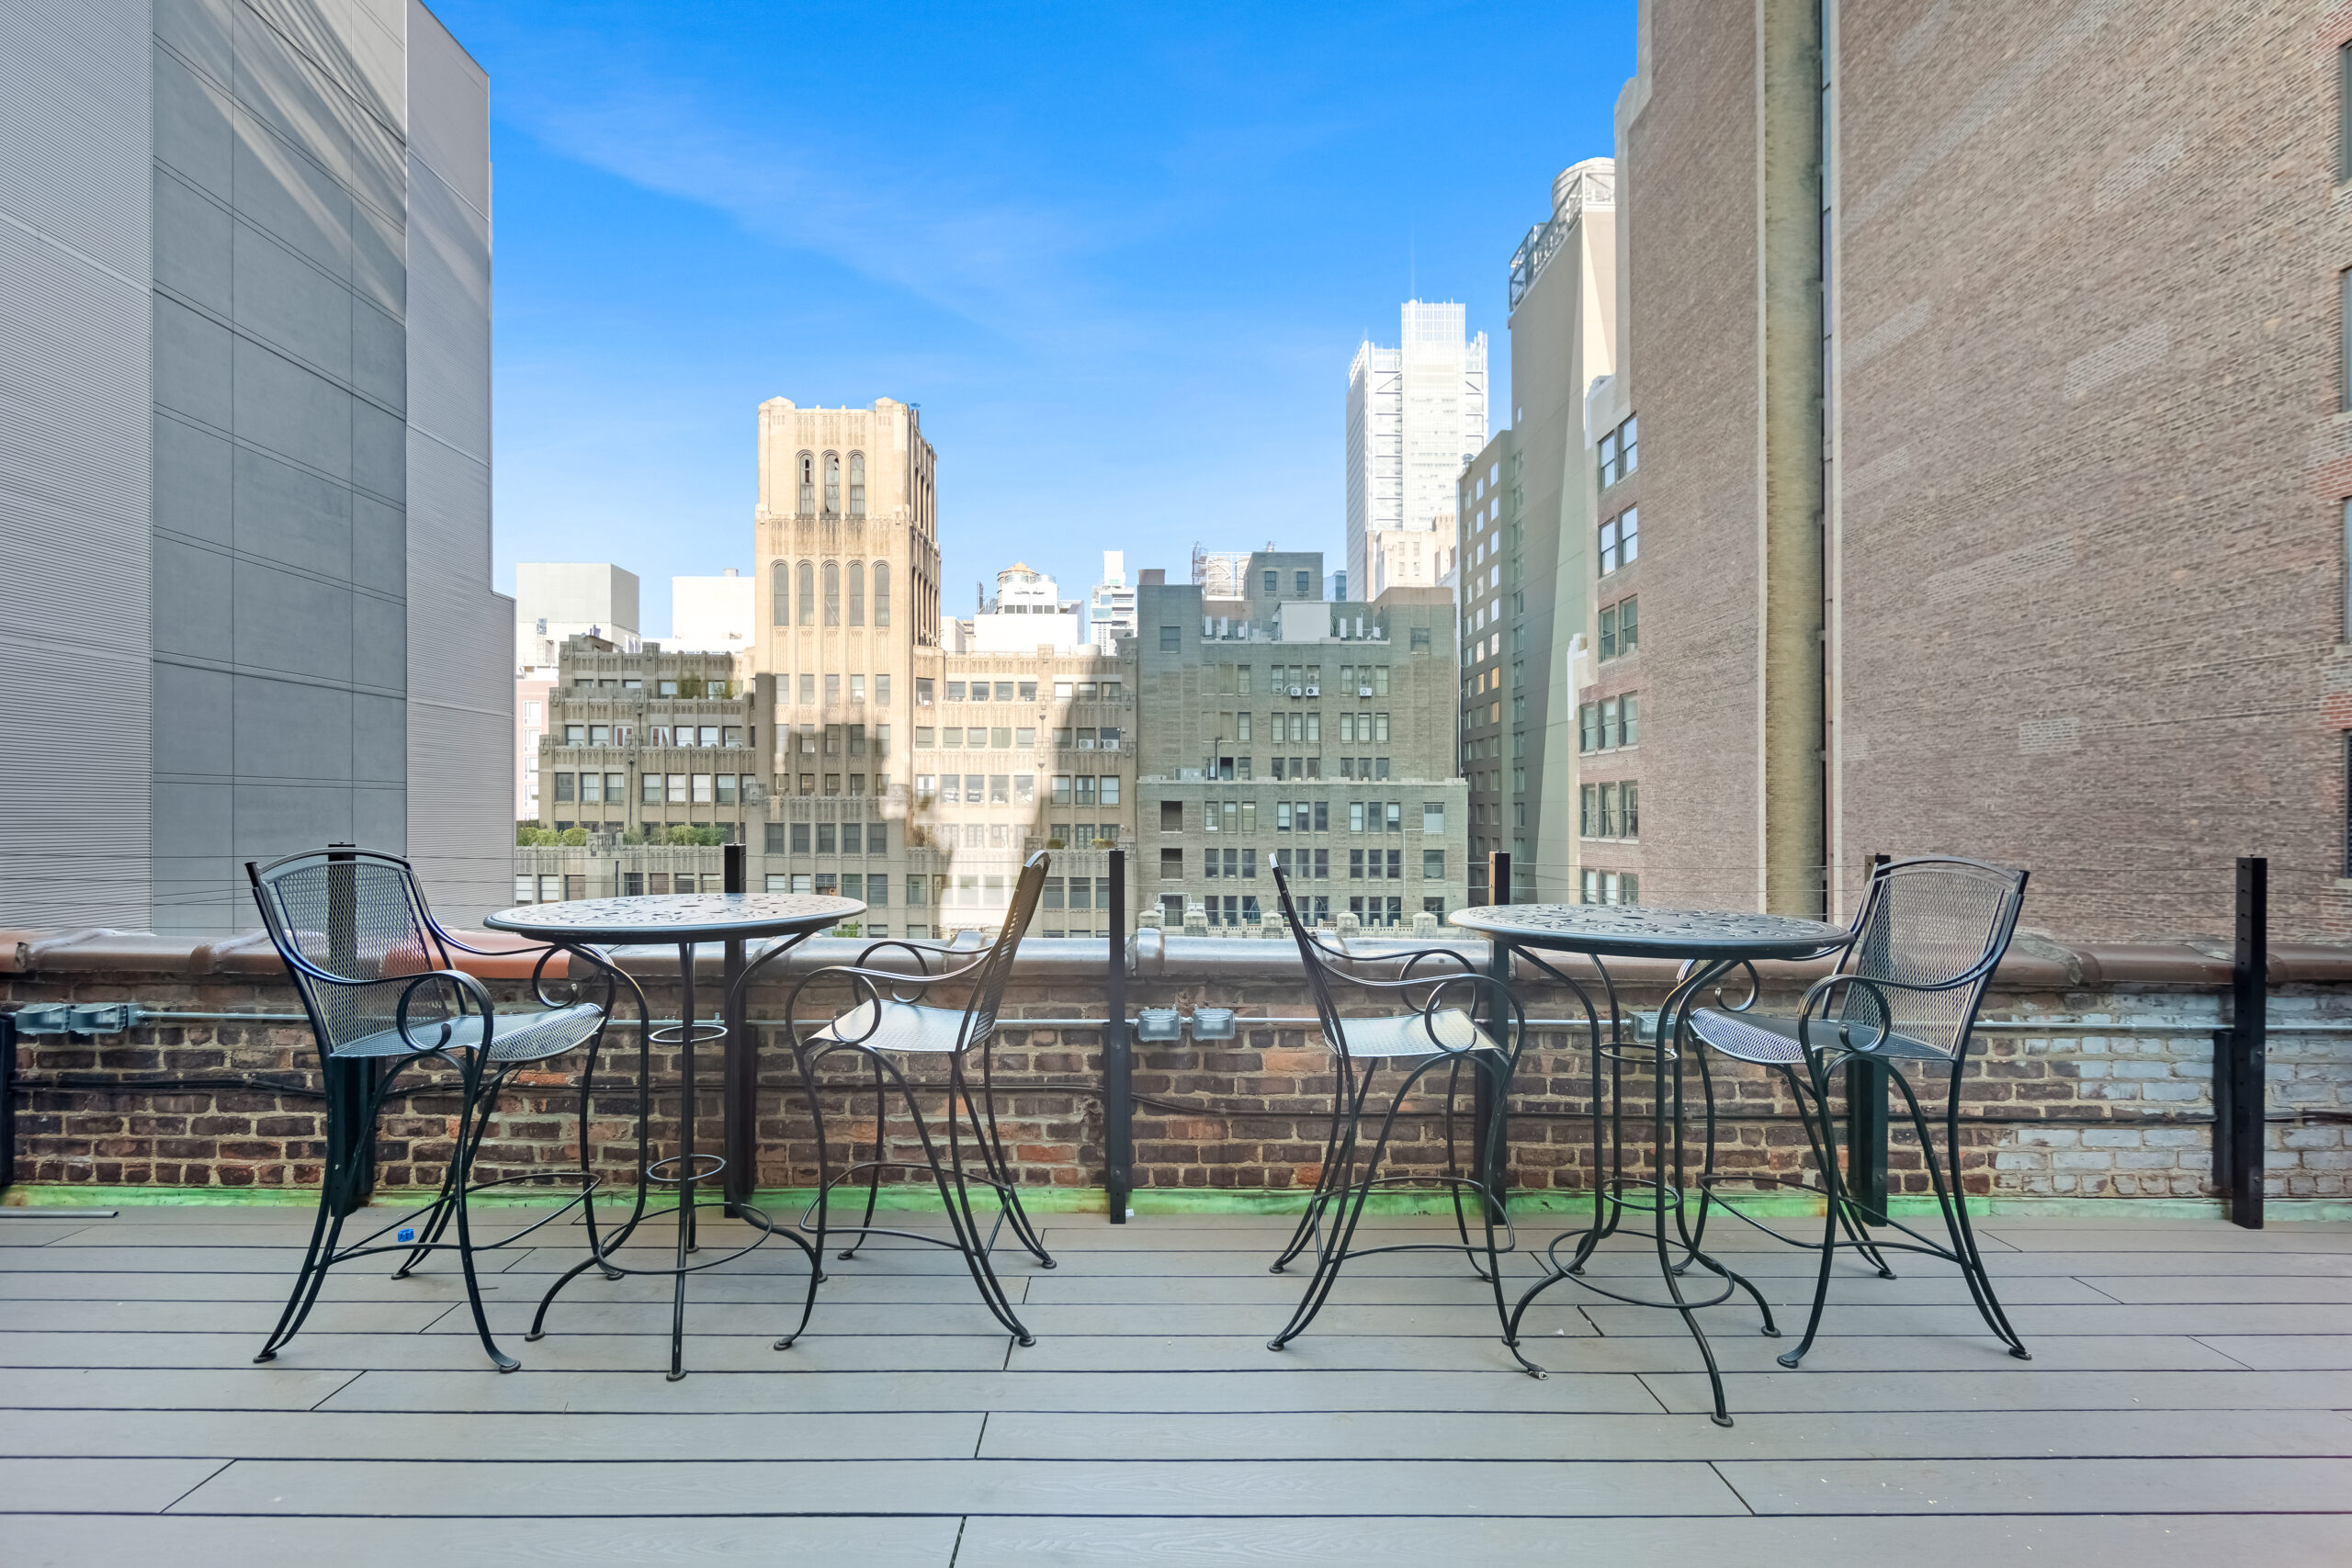 Outdoor space for an office as luxury worth the price | Workville